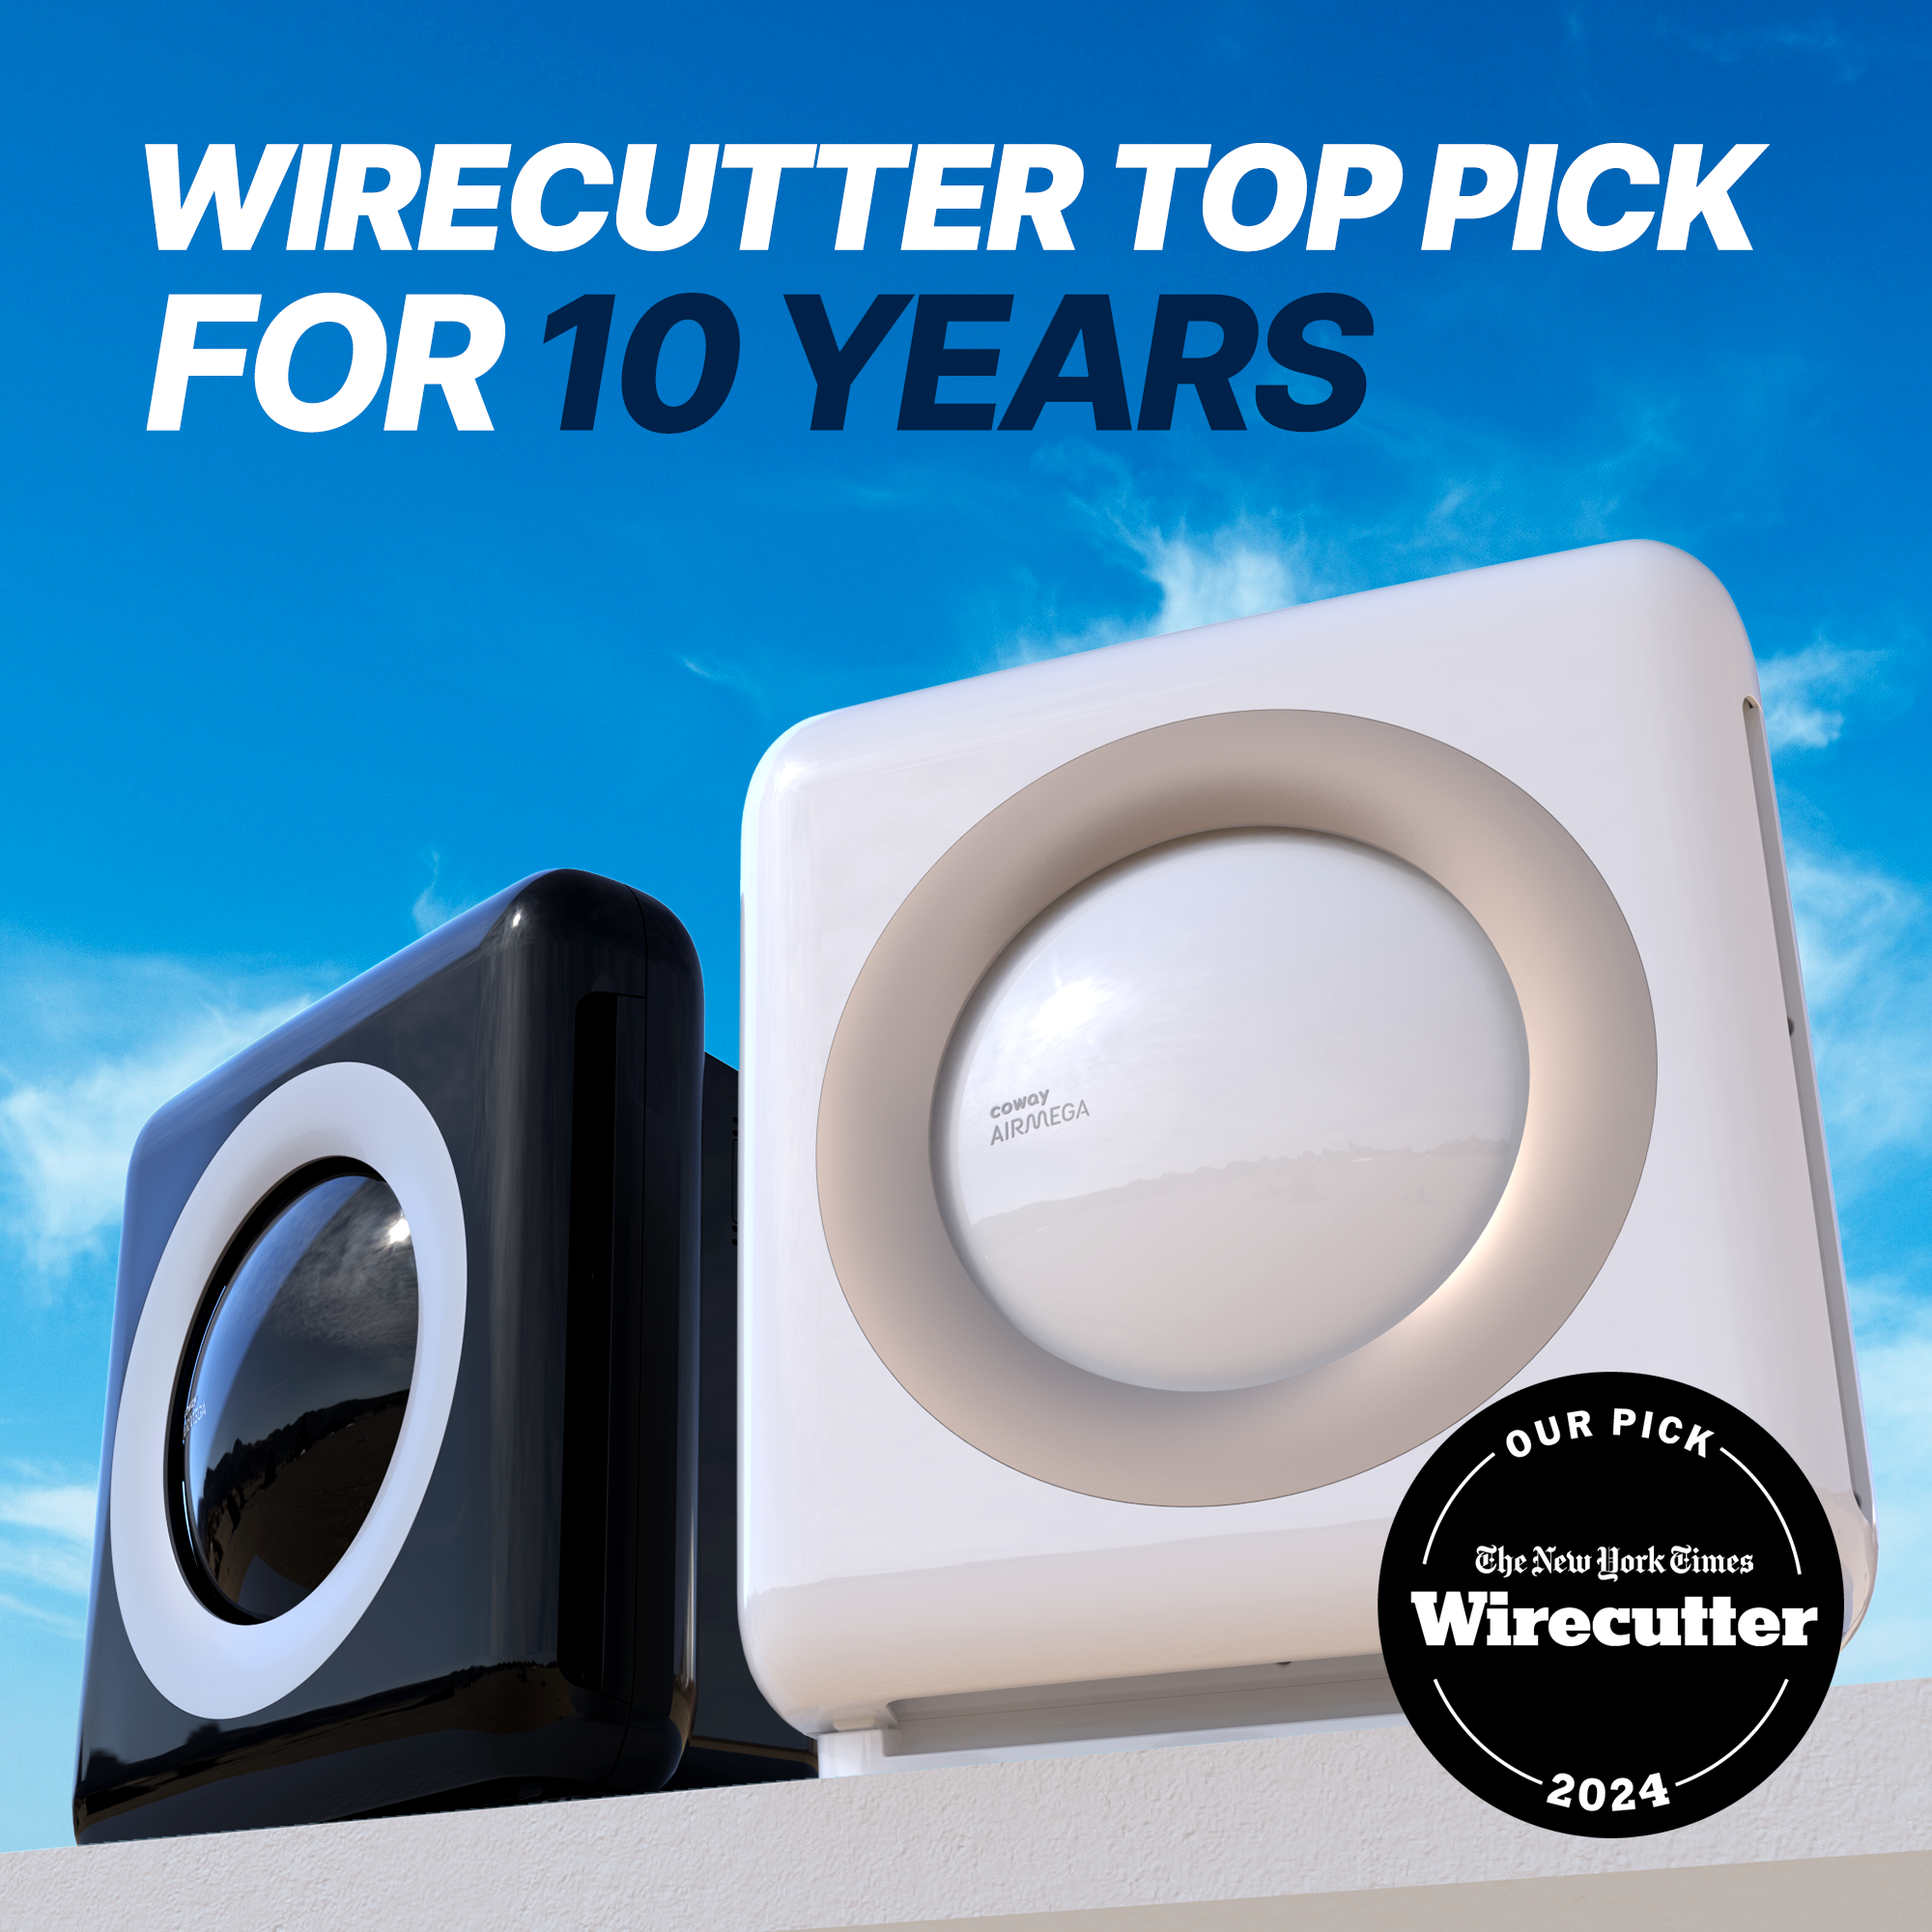 Airmega Mighty Wirecutter Top Pick for 10 Years